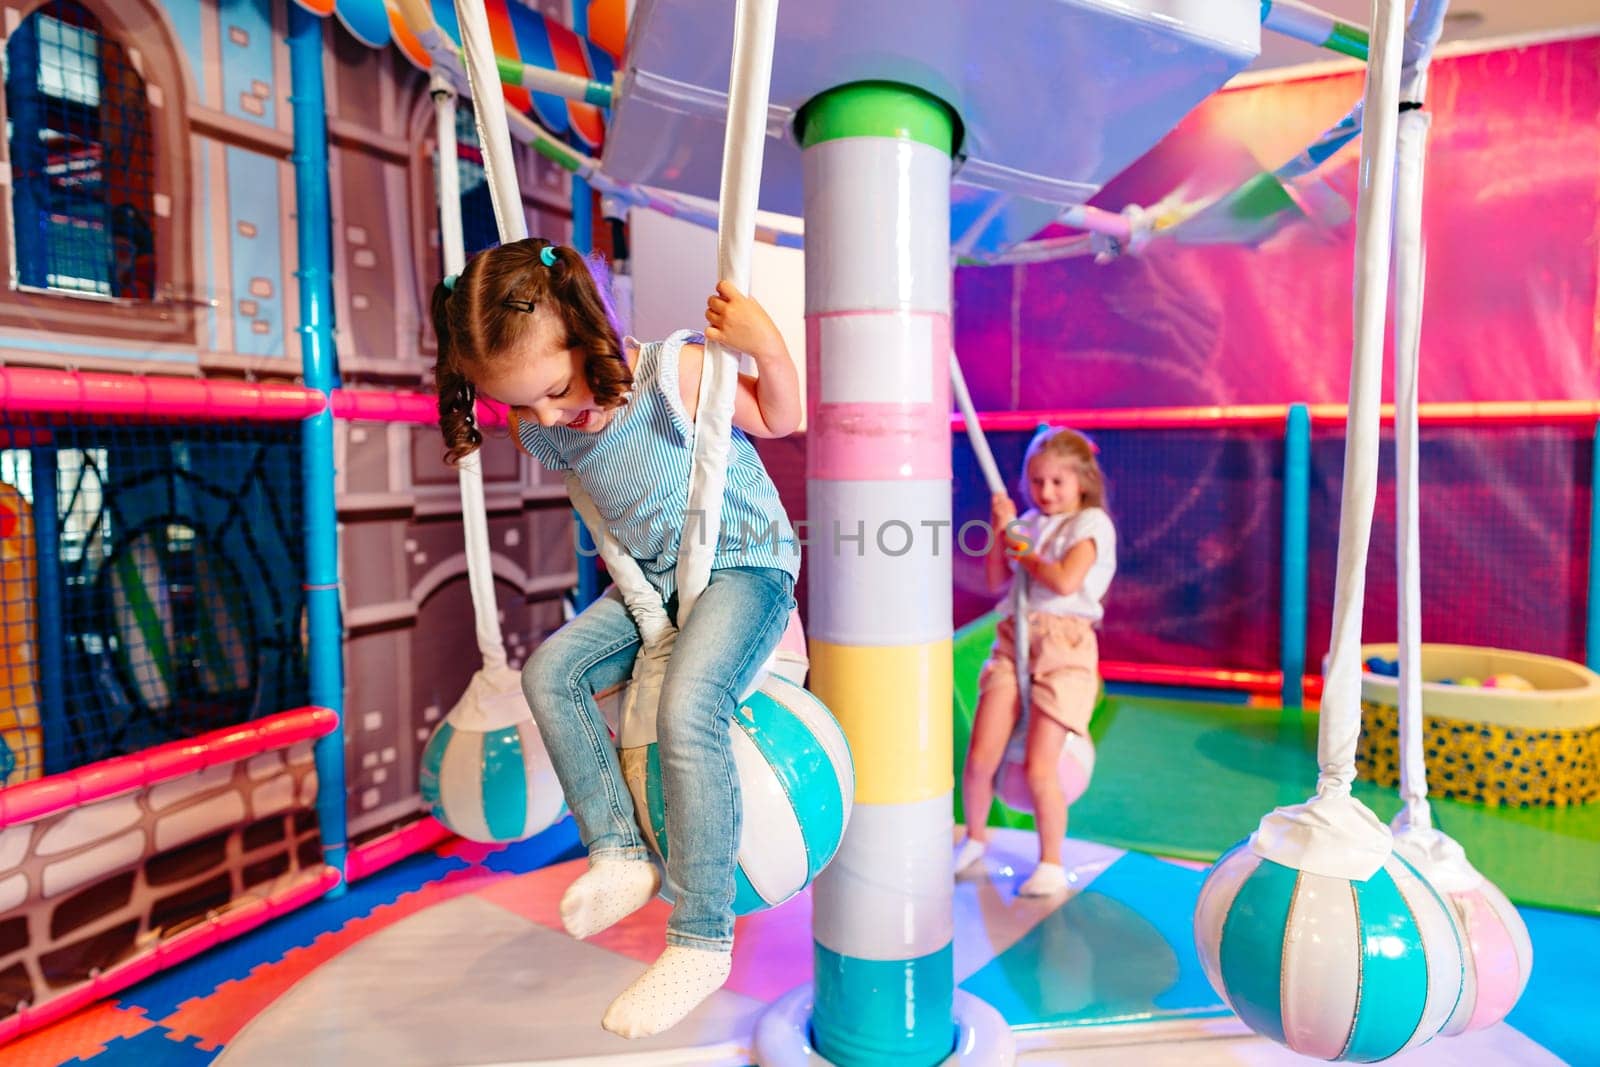 A cheerful young girl with a ponytail is having fun climbing on colorful play equipment at an indoor playground. She is wearing a sleeveless top and pants, while another child is visible in the background, adding to the lively atmosphere.